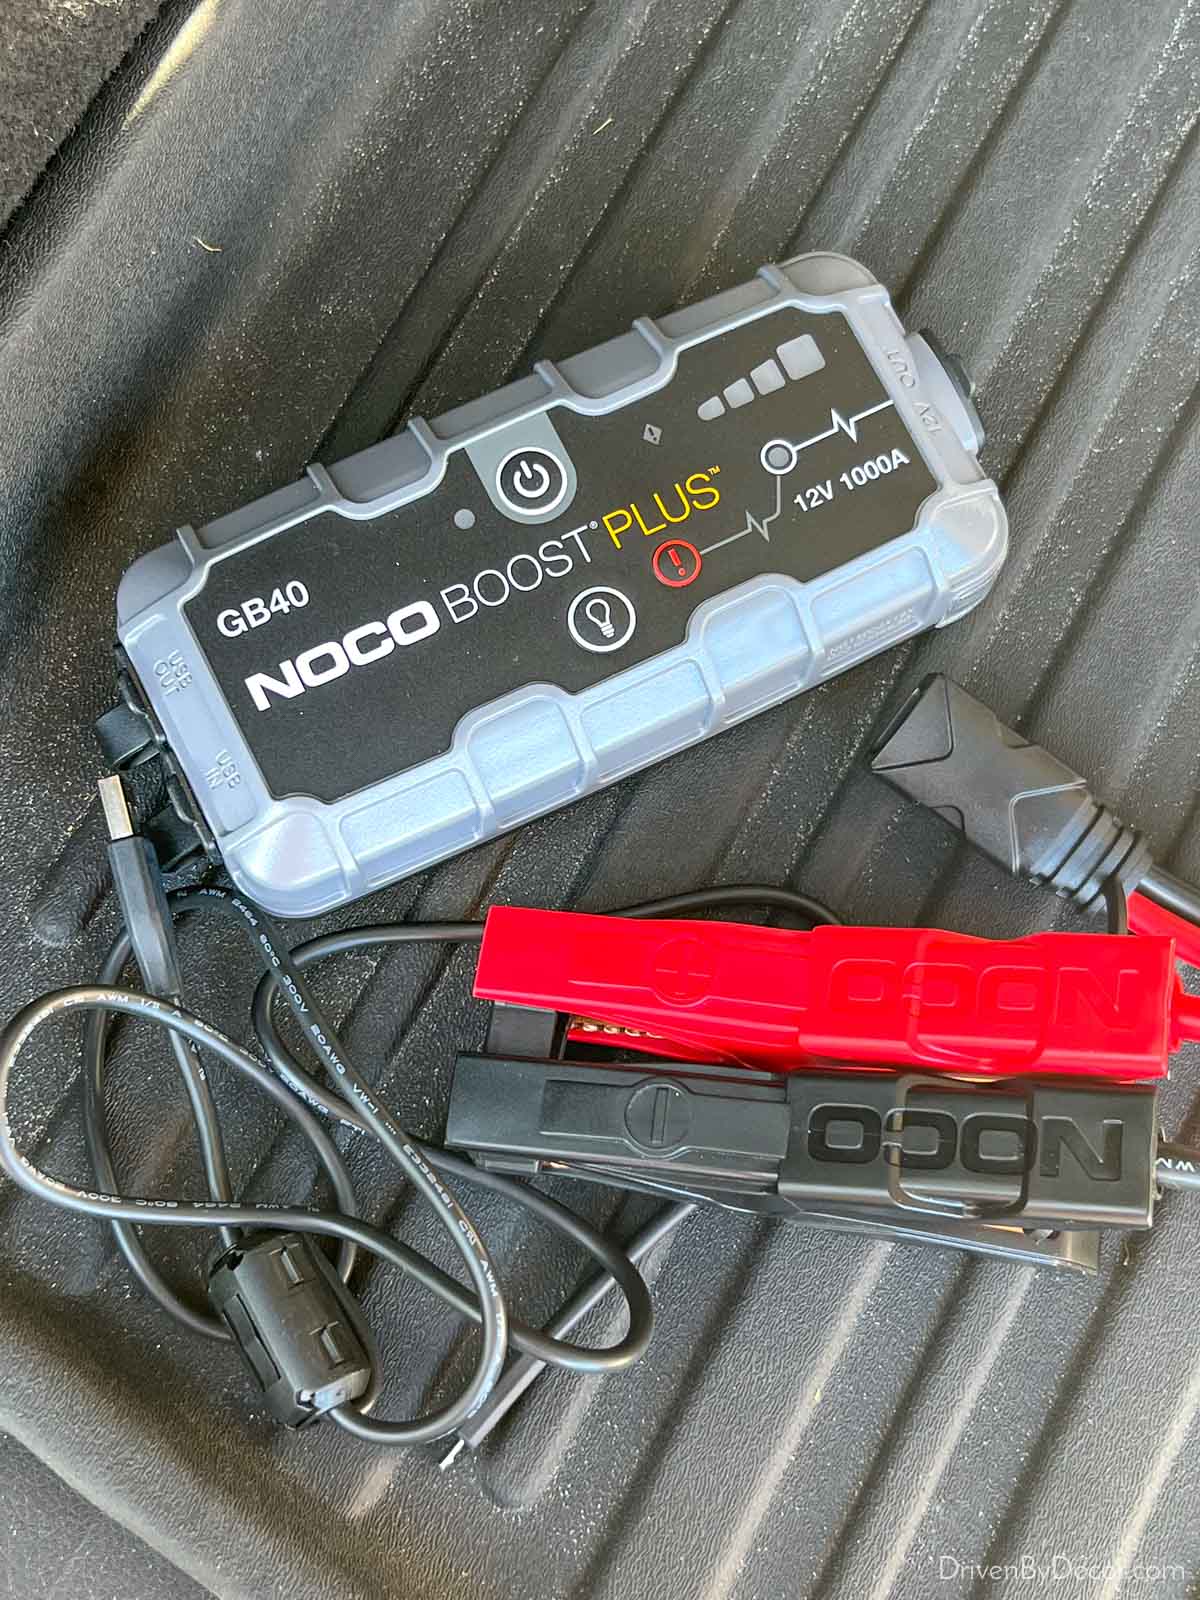 Portable jump starter - would make a great Father's Day gift!